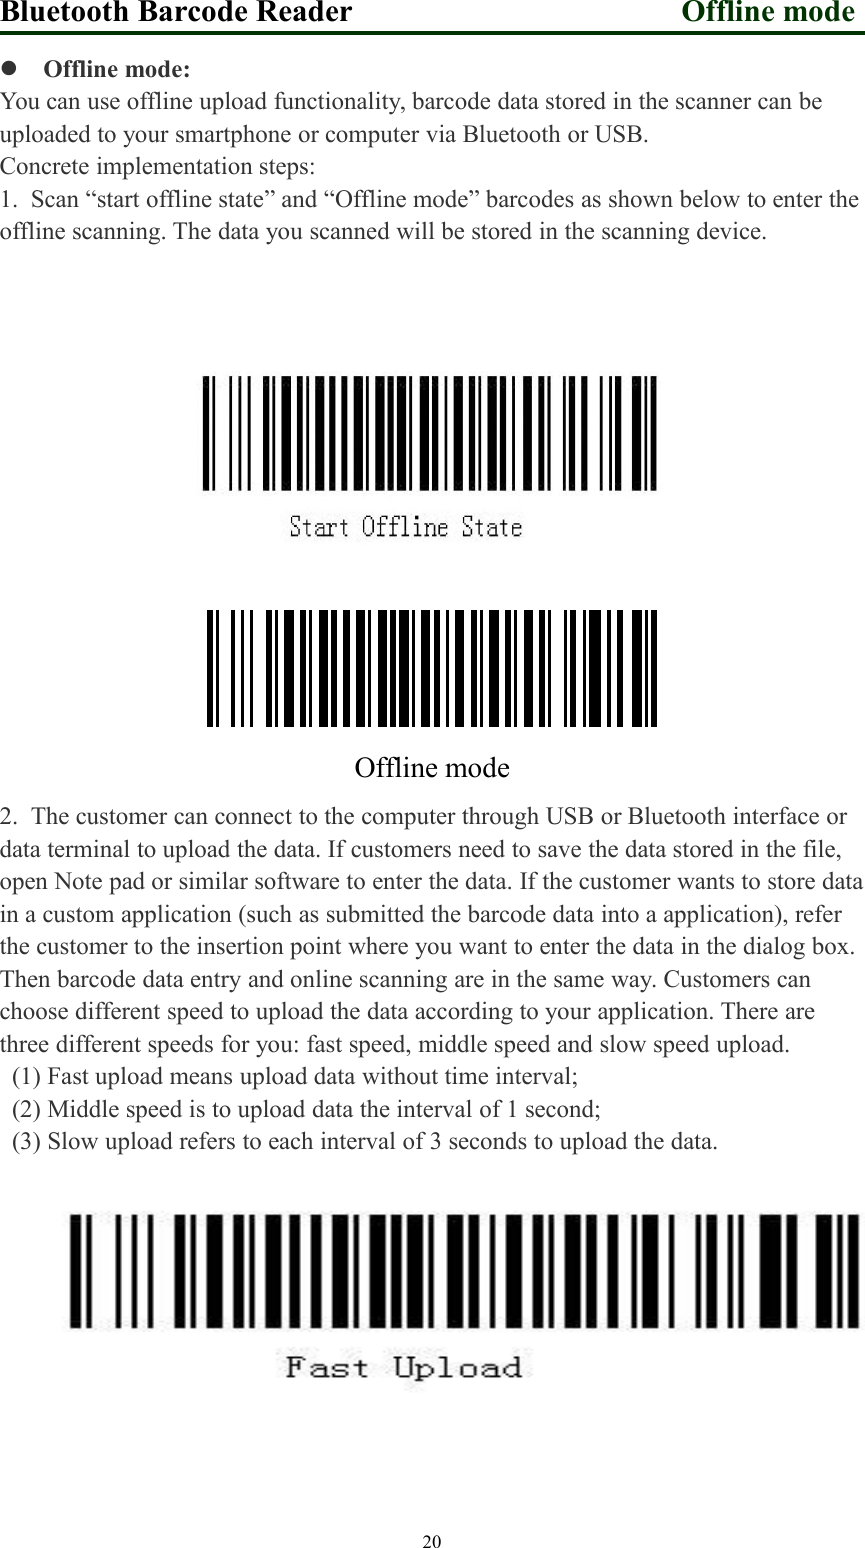 Bluetooth Barcode Reader Offline mode20Offline mode:You can use offline upload functionality, barcode data stored in the scanner can beuploaded to your smartphone or computer via Bluetooth or USB.Concrete implementation steps:1. Scan “start offline state” and “Offline mode” barcodes as shown below to enter theoffline scanning. The data you scanned will be stored in the scanning device.10670111Offline mode2. The customer can connect to the computer through USB or Bluetooth interface ordata terminal to upload the data. If customers need to save the data stored in the file,open Note pad or similar software to enter the data. If the customer wants to store datain a custom application (such as submitted the barcode data into a application), referthe customer to the insertion point where you want to enter the data in the dialog box.Then barcode data entry and online scanning are in the same way. Customers canchoose different speed to upload the data according to your application. There arethree different speeds for you: fast speed, middle speed and slow speed upload.(1) Fast upload means upload data without time interval;(2) Middle speed is to upload data the interval of 1 second;(3) Slow upload refers to each interval of 3 seconds to upload the data.